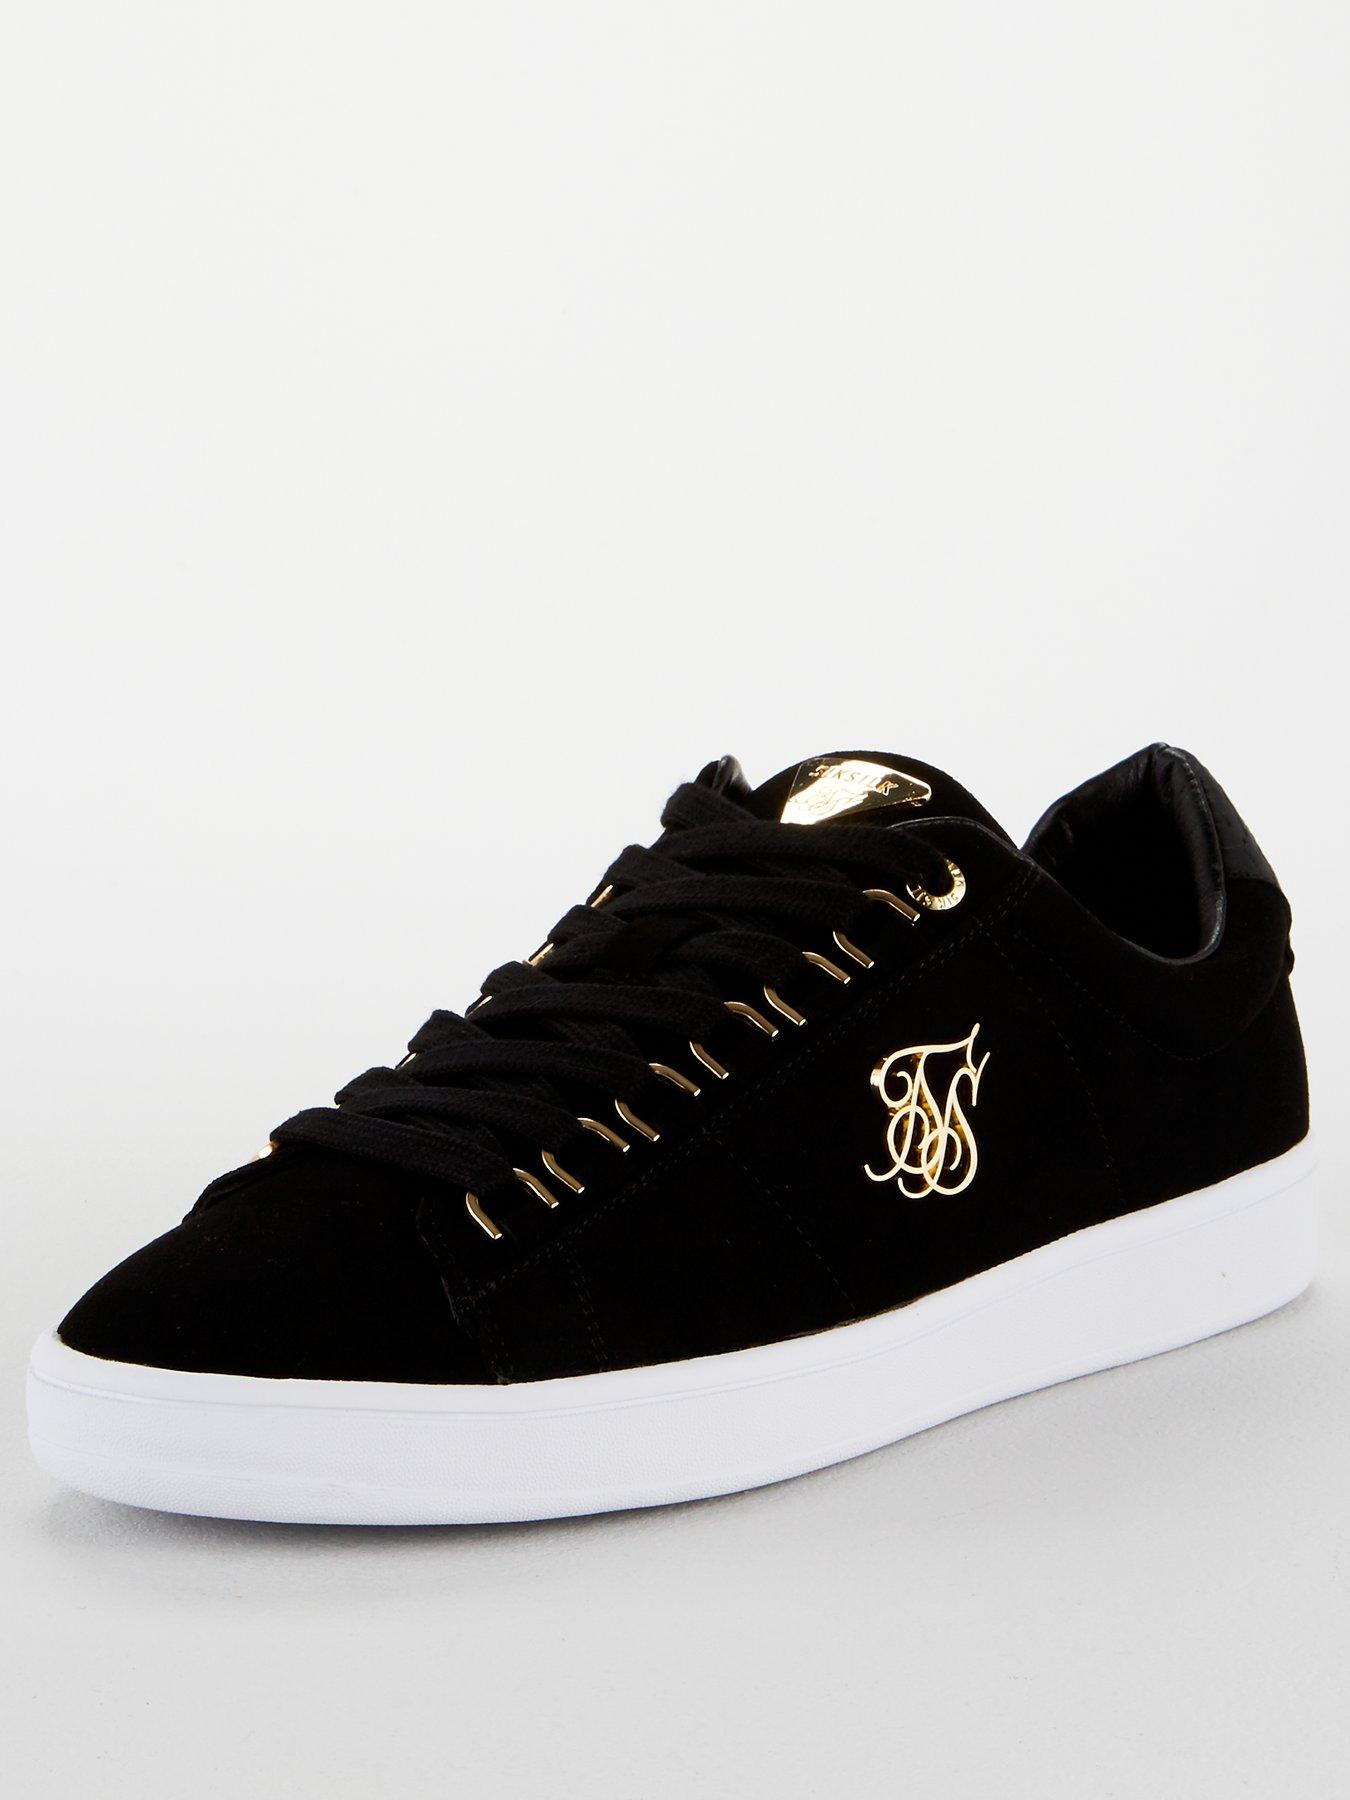 mens siksilk trainers